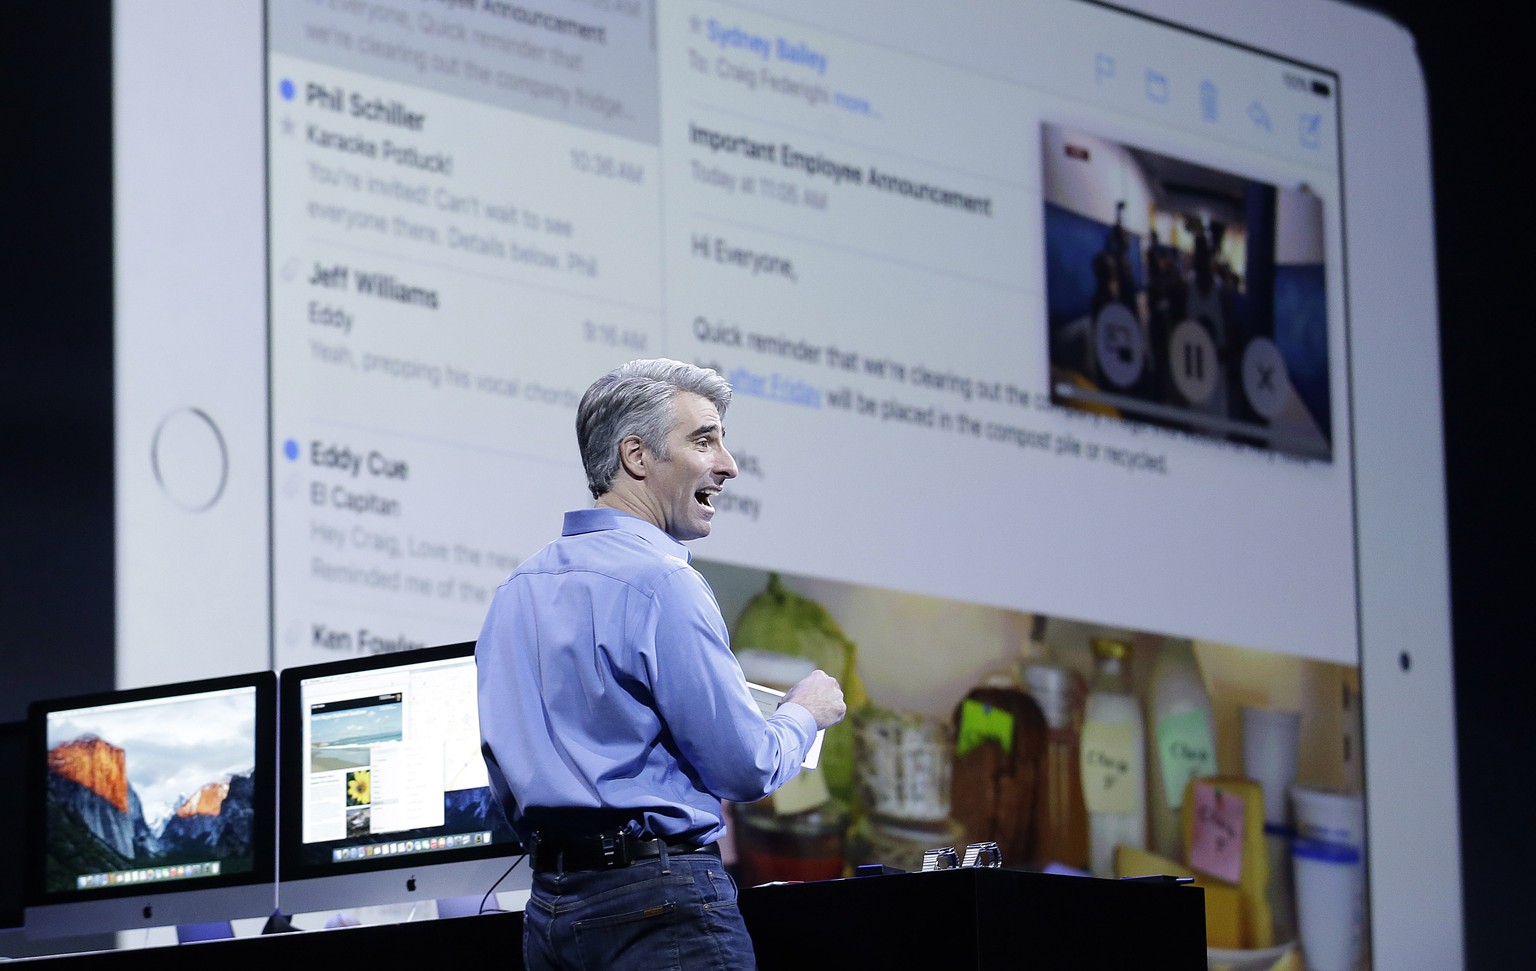 Craig Federighi, Apple senior vice president of Software Engineering, demonstrates the multitask feature on an iPad at the Apple Worldwide Developers Conference in San Francisco, Monday, June 8, 2015. ...